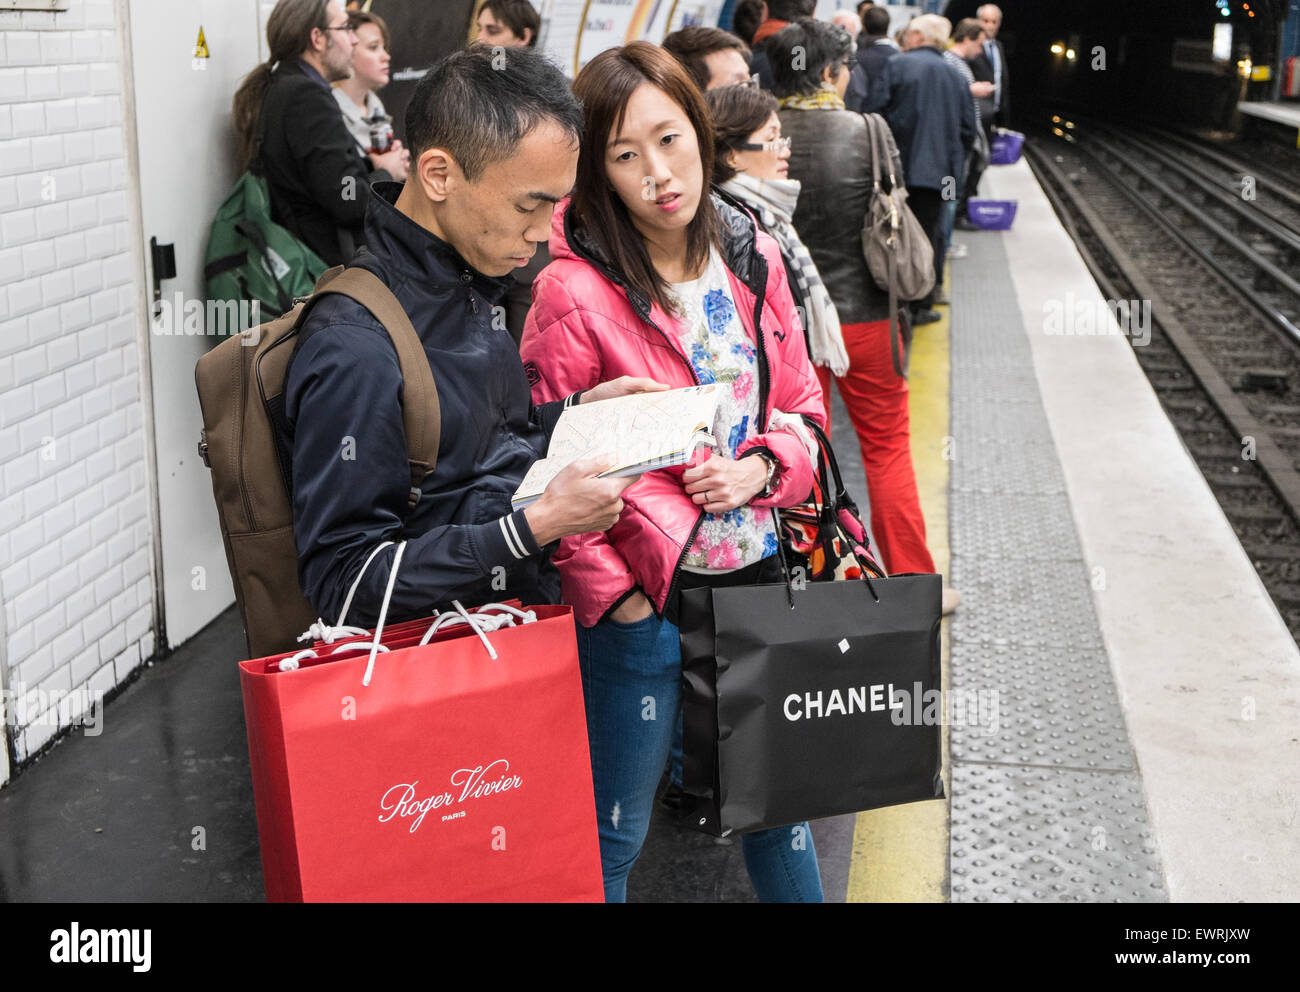 Paris,France,French,Chinese tourists,tourist, with,Chanel,branded,shop,bag,at metro train station late at night after busy shopping day. Stock Photo